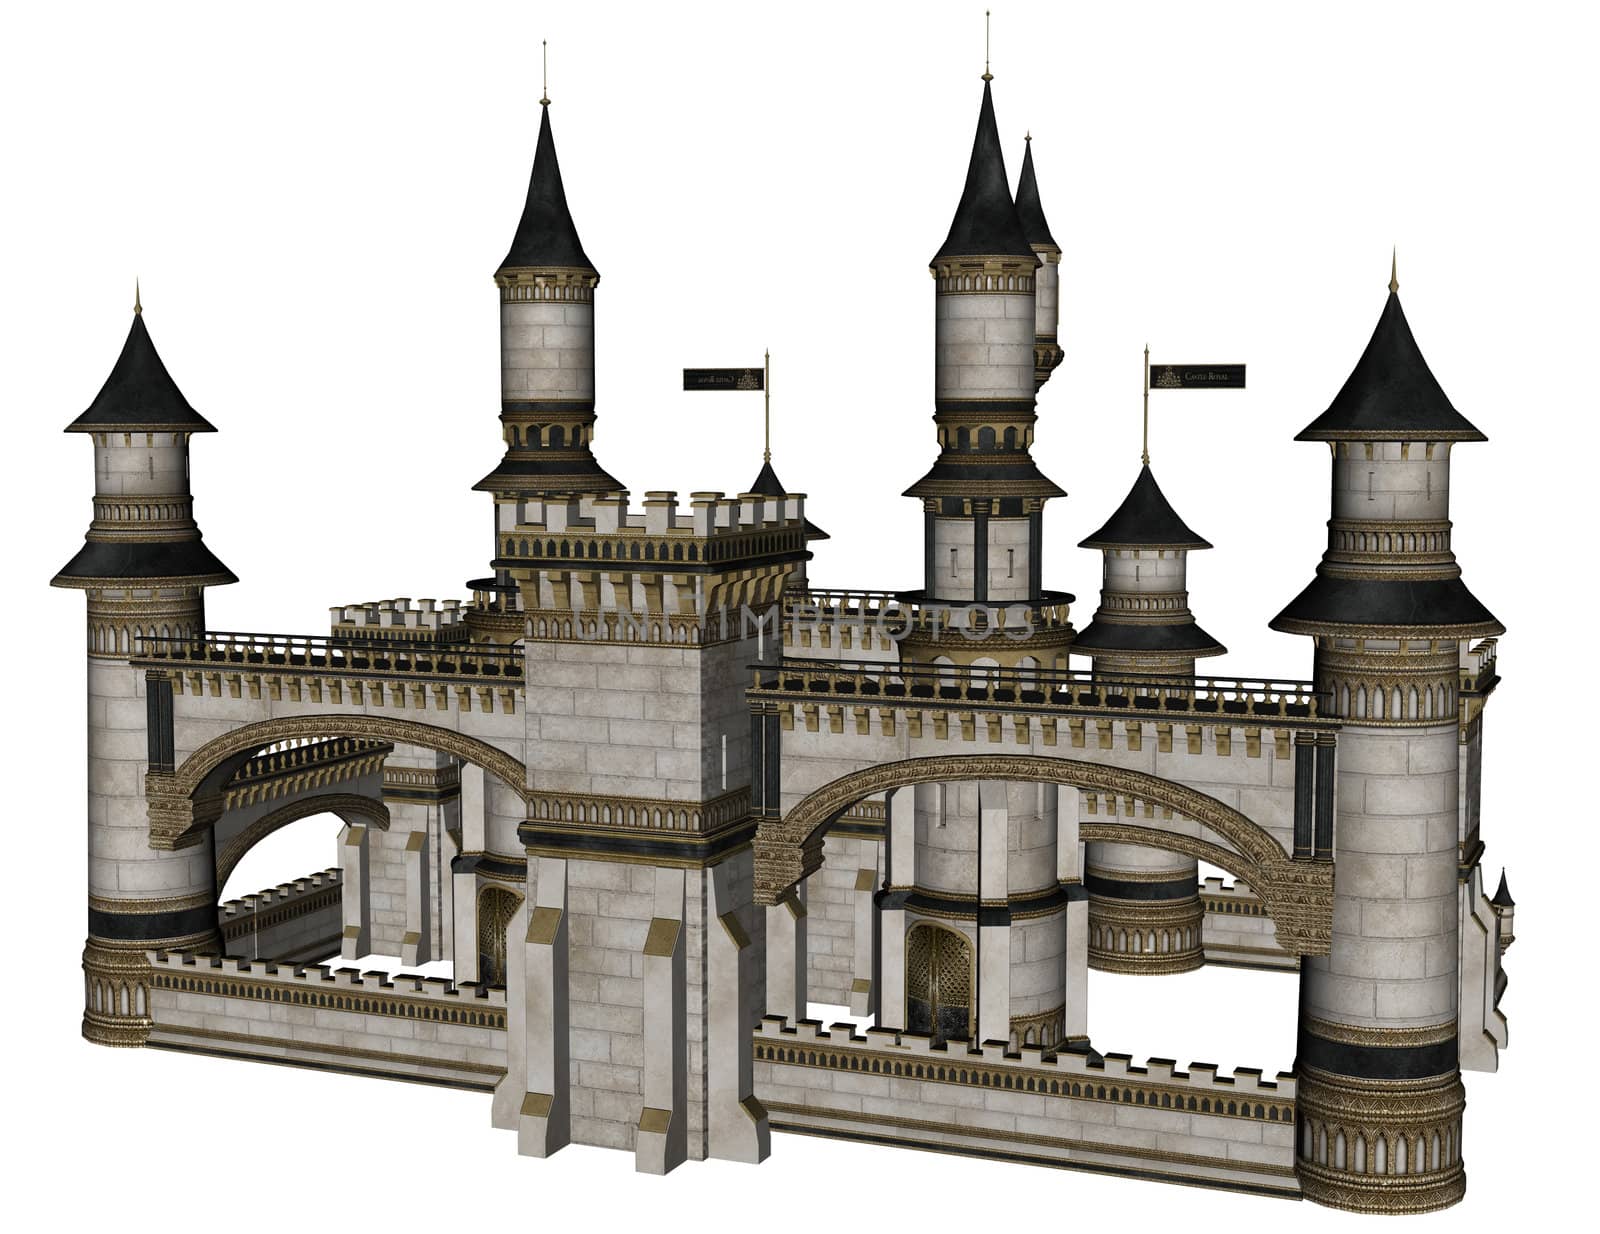 3D rendered illustration of fantasy castle on white background isolated